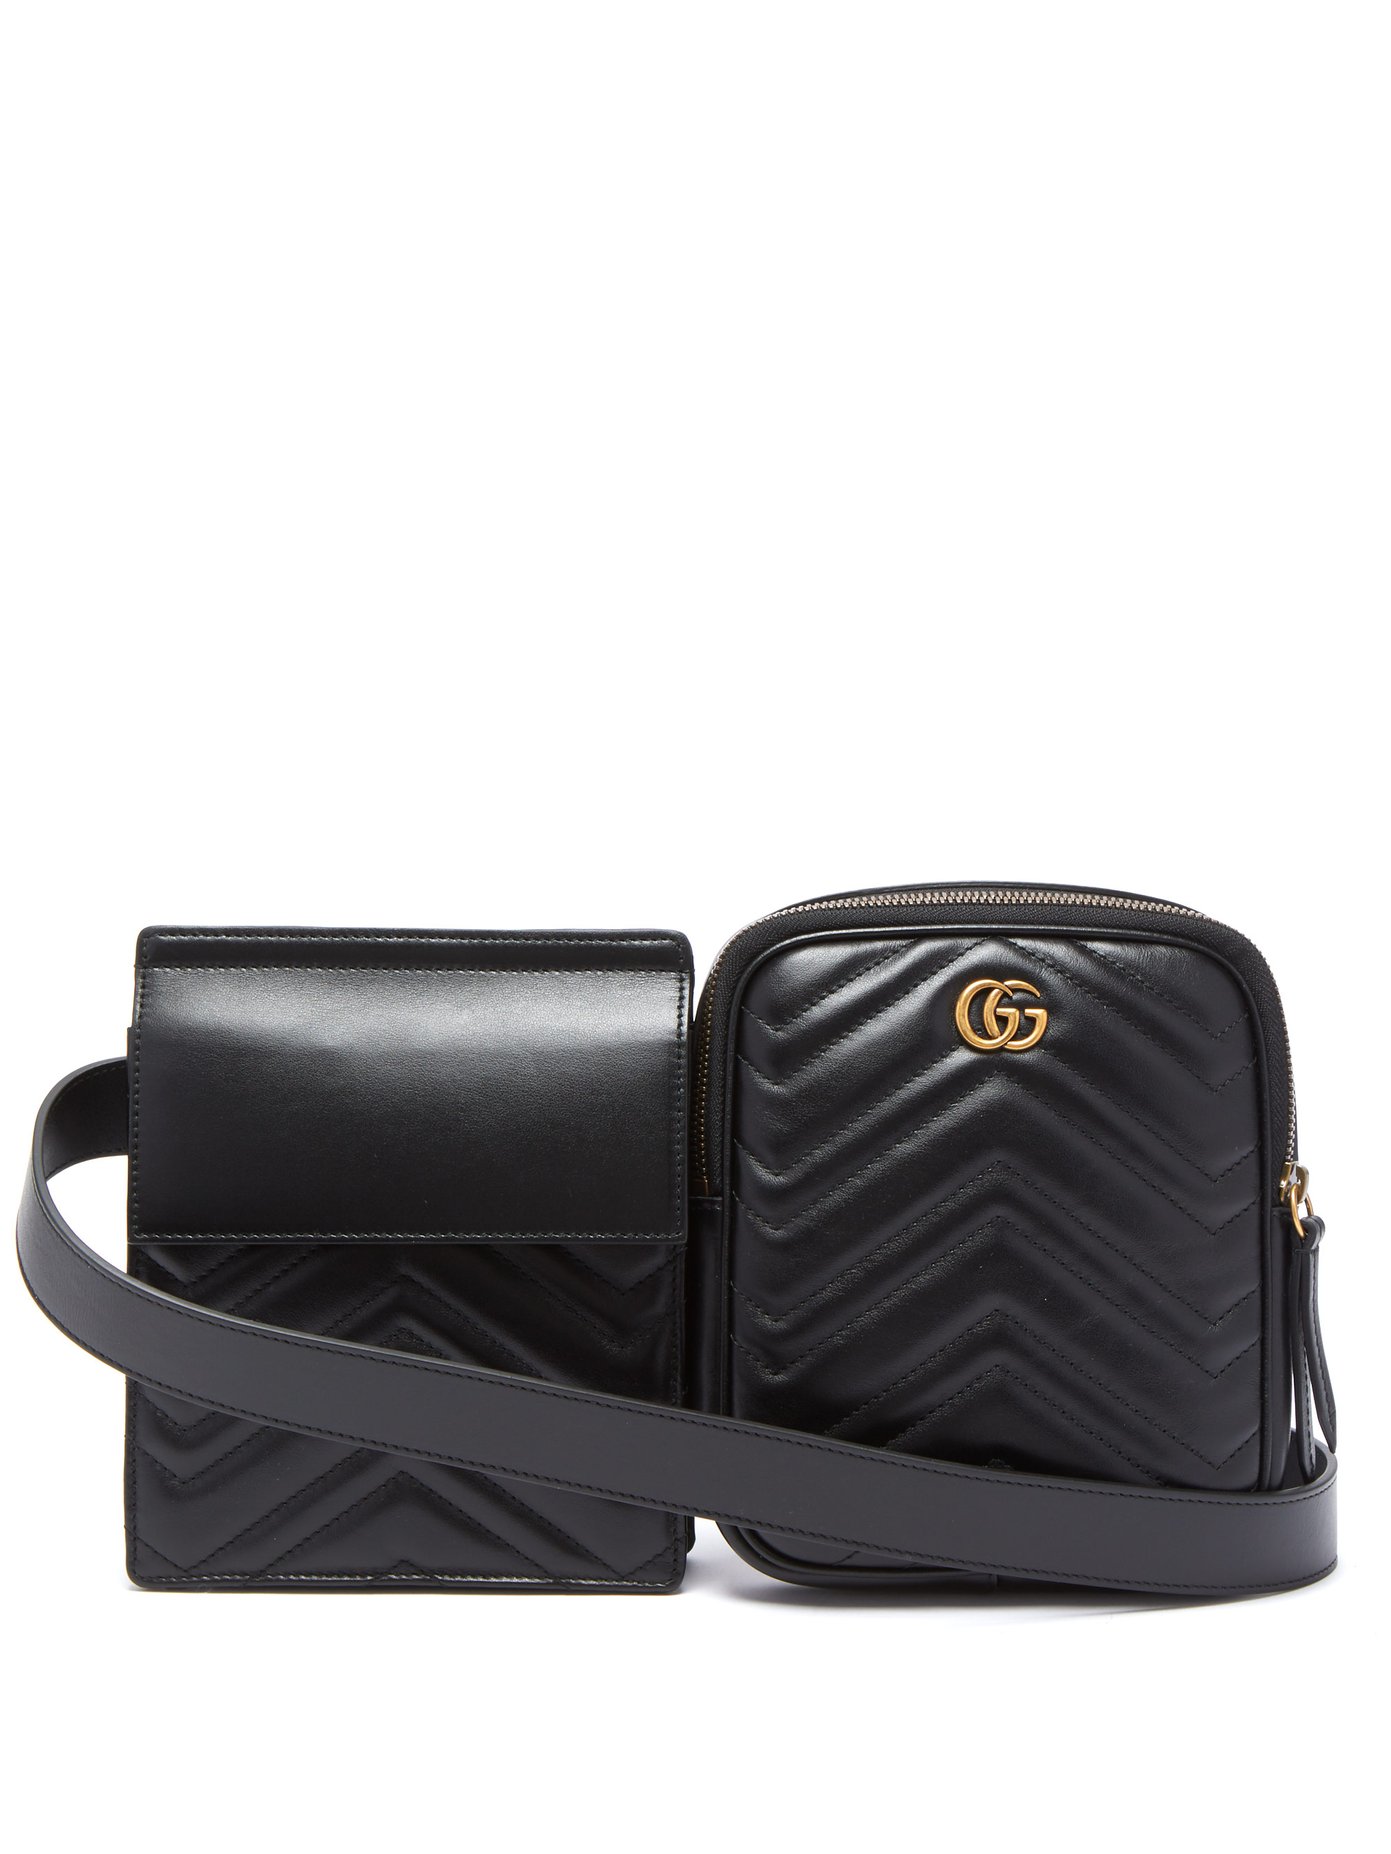 gg marmont leather bag